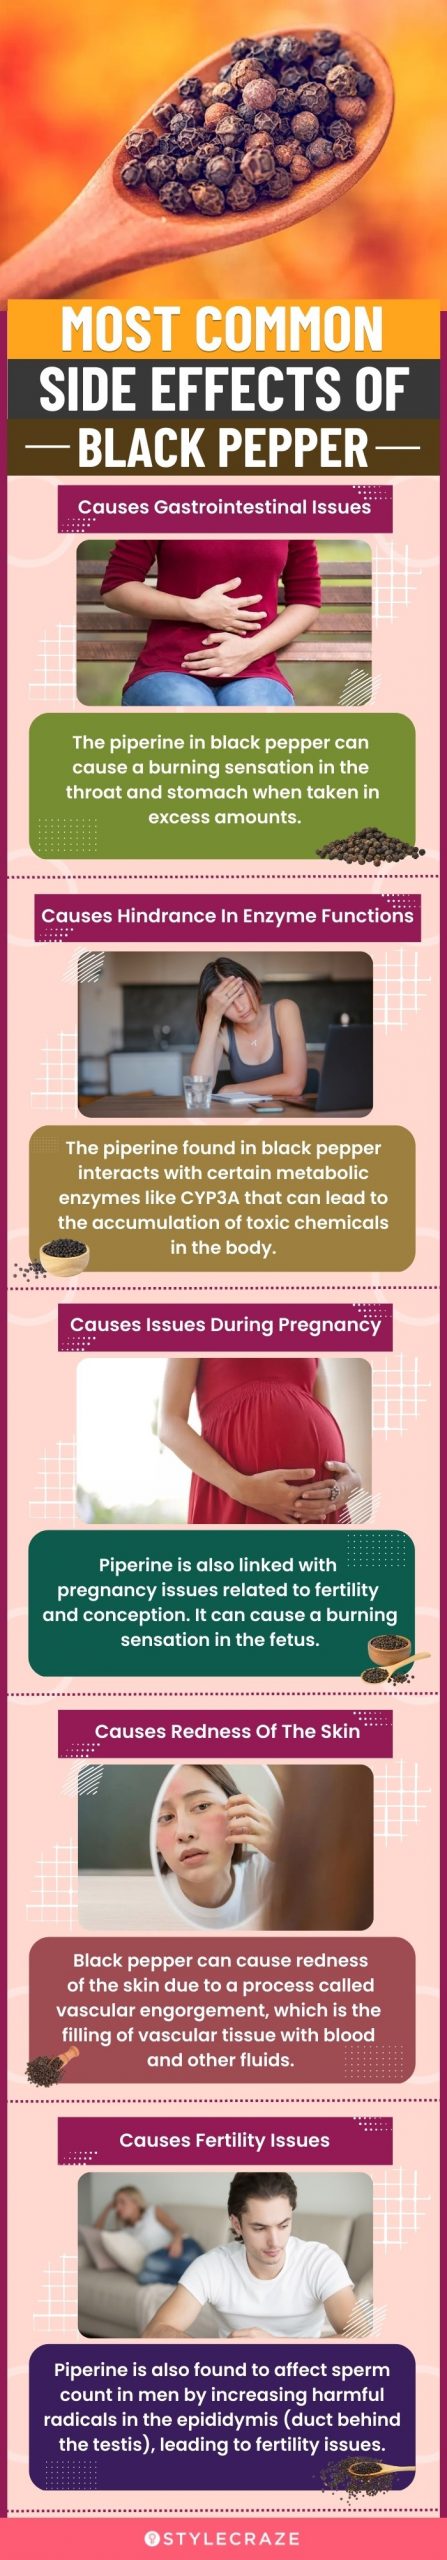 most common side effects of black pepper [infographic]